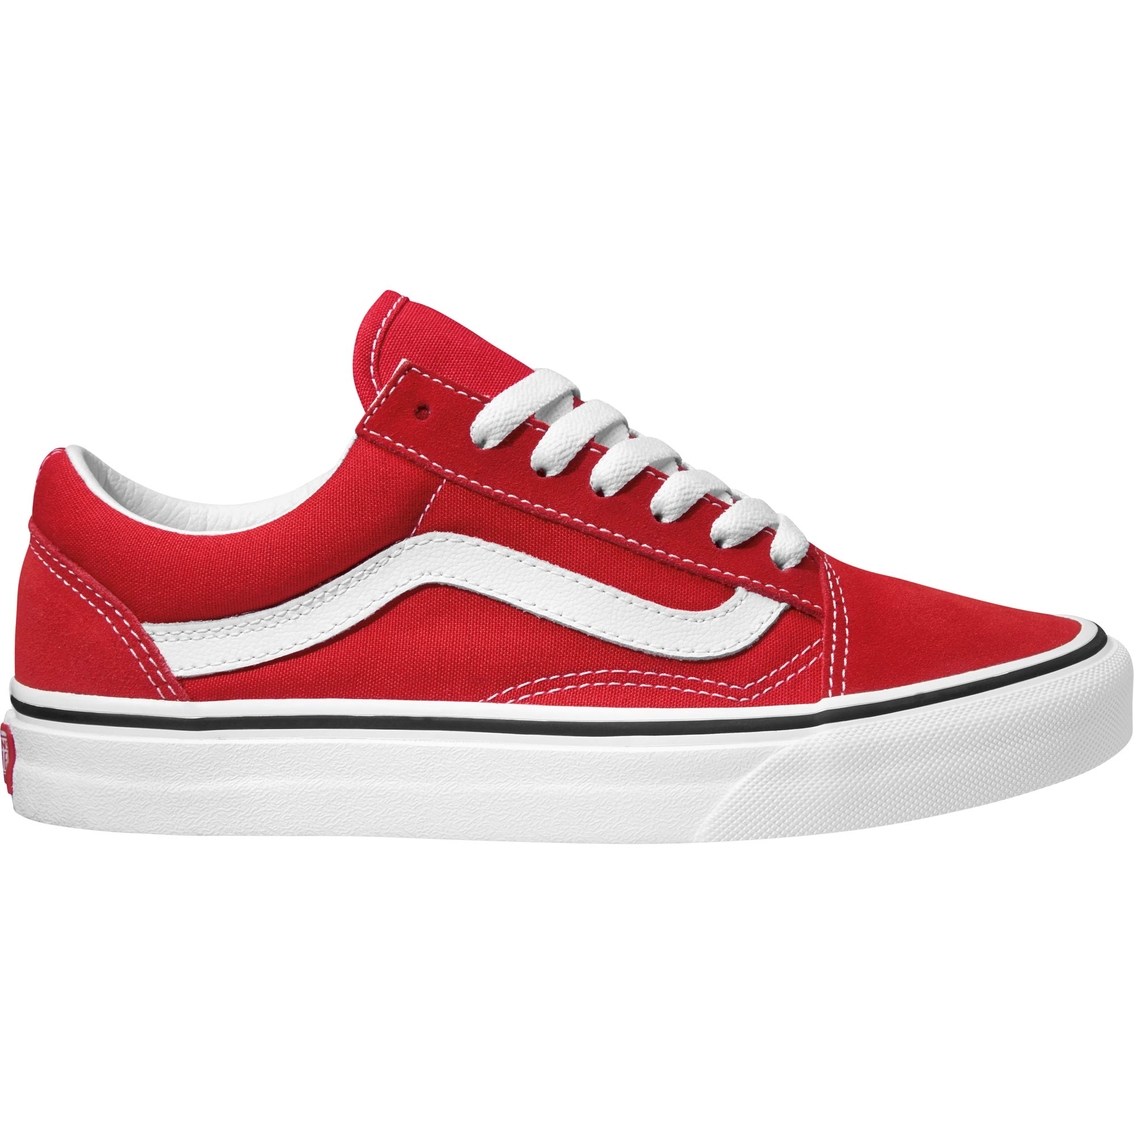 Vans Women's Old Skool Red Shoes | Sneakers | Shoes | Shop The Exchange Red Vans Shoes For Girls